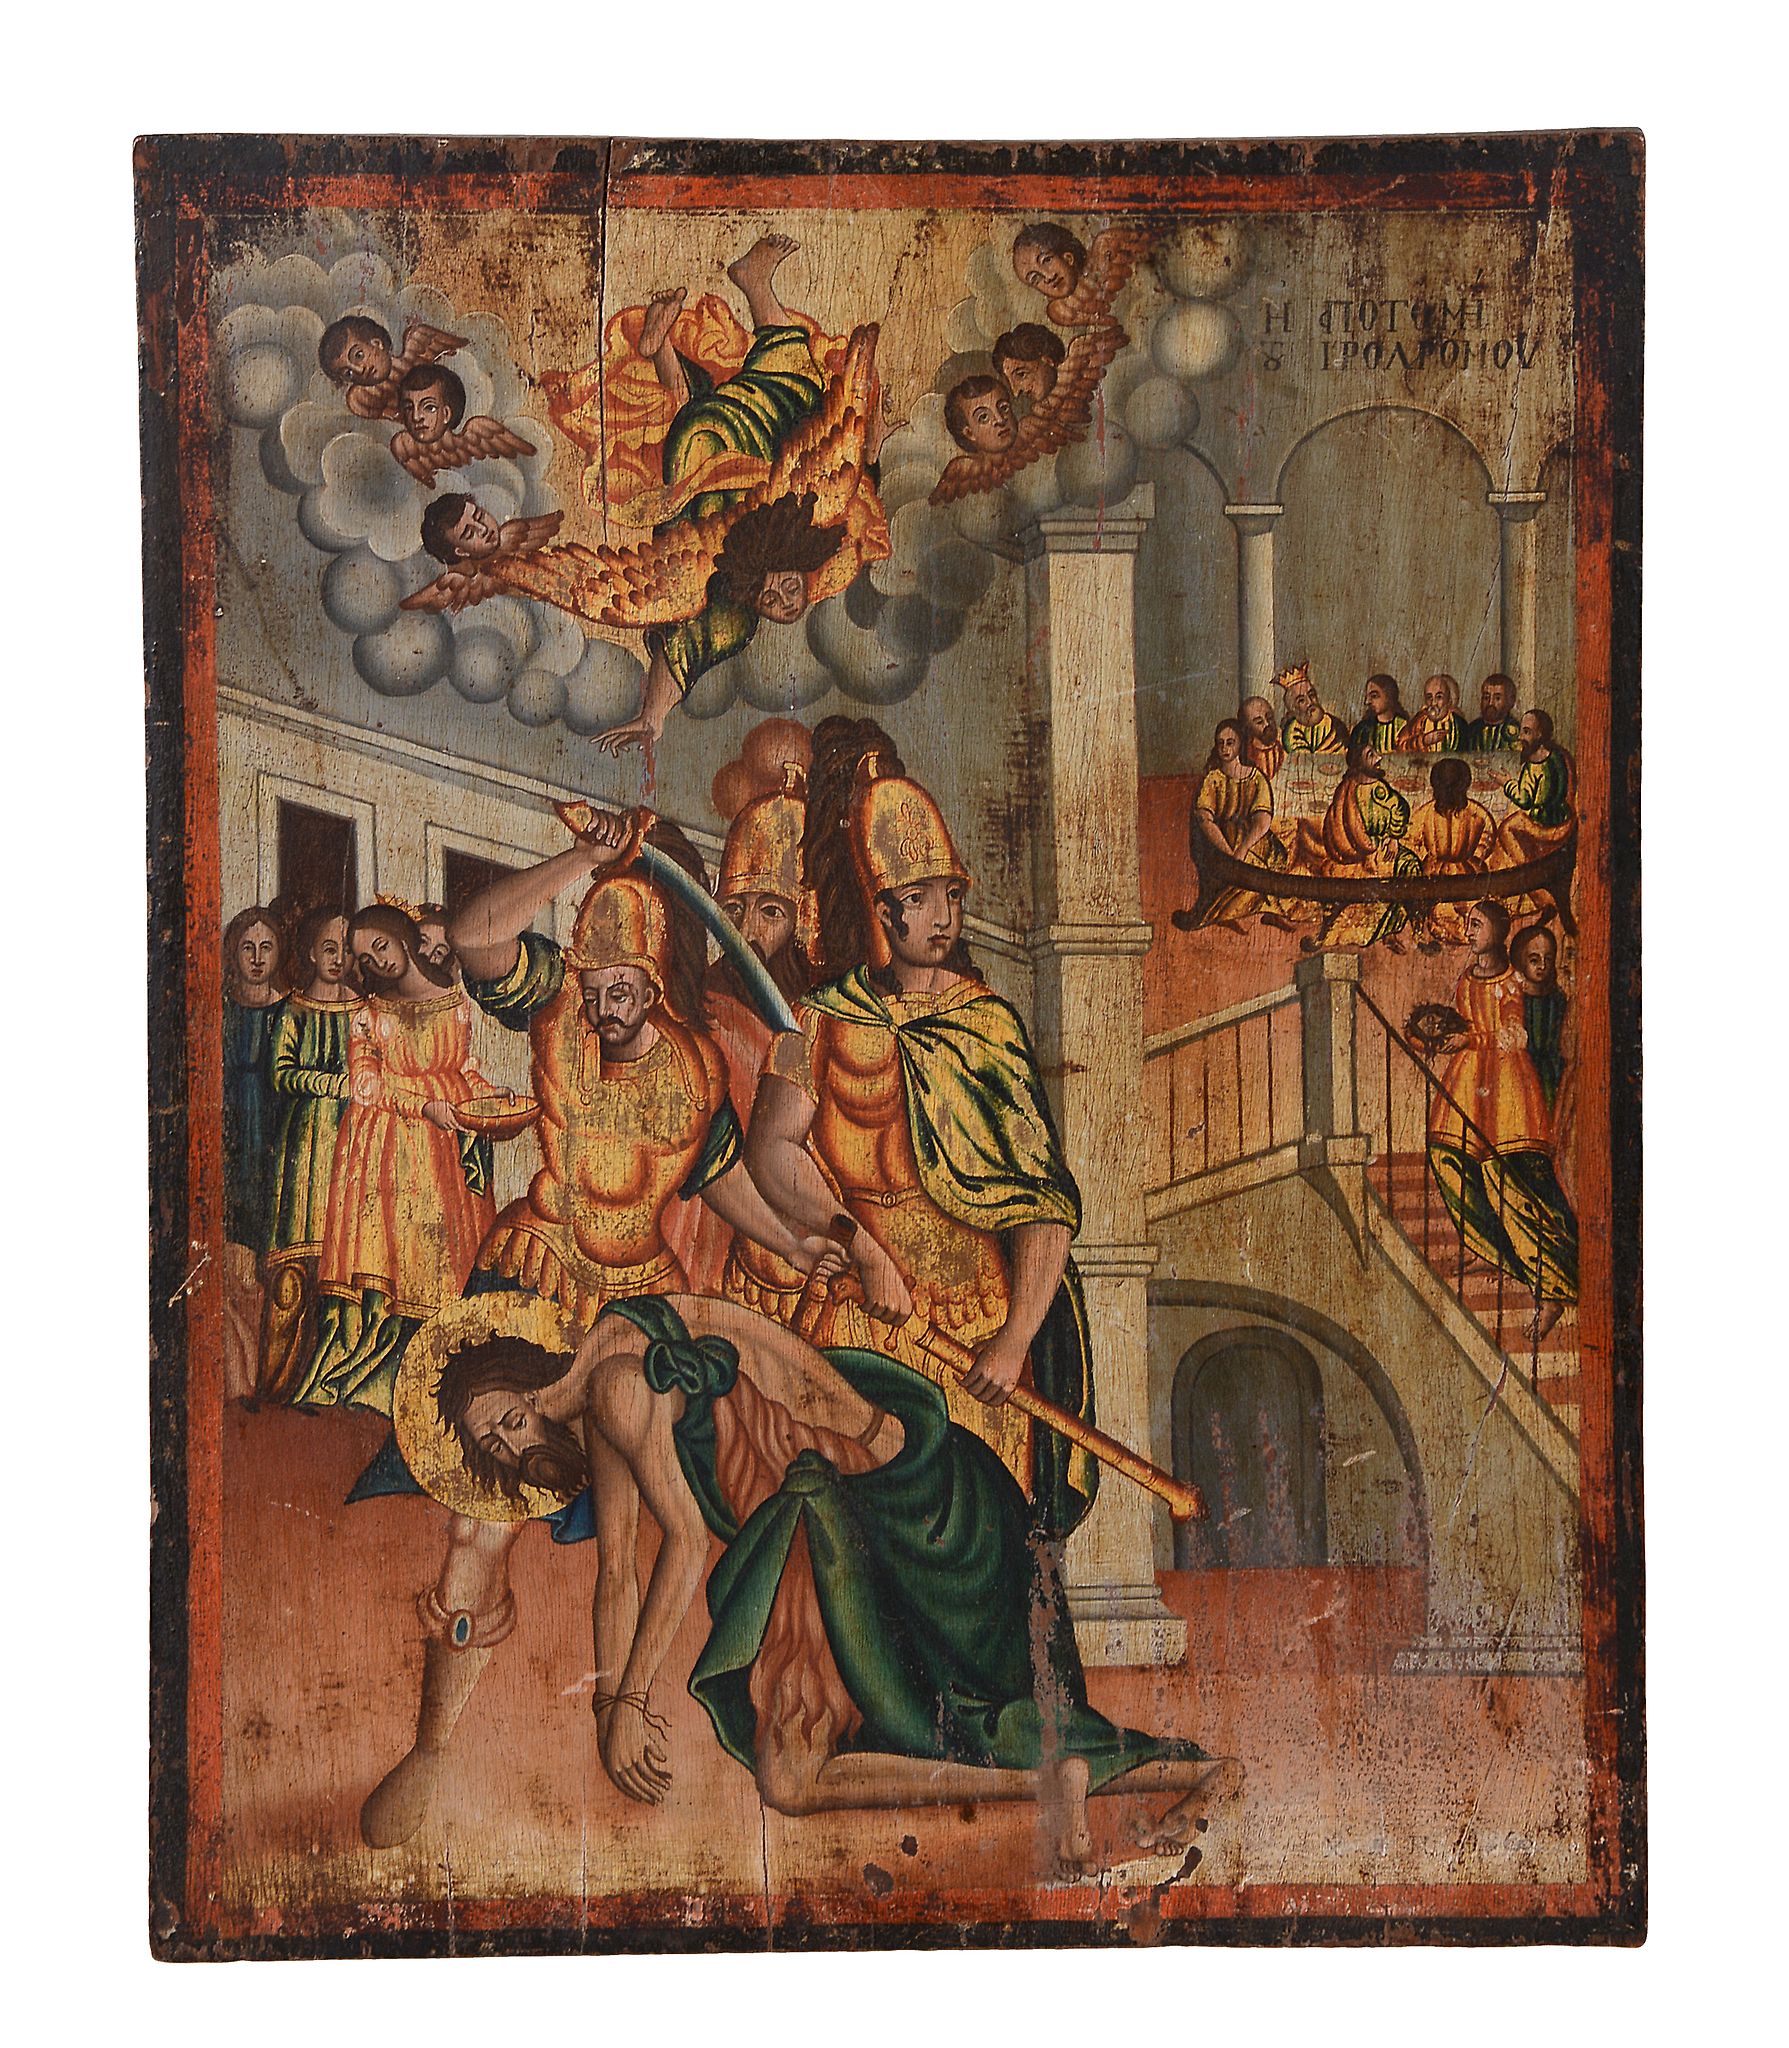 VARIOUS PROPERTIES A Greek icon depicting the beheading of John the Baptist   VARIOUS PROPERTIES A